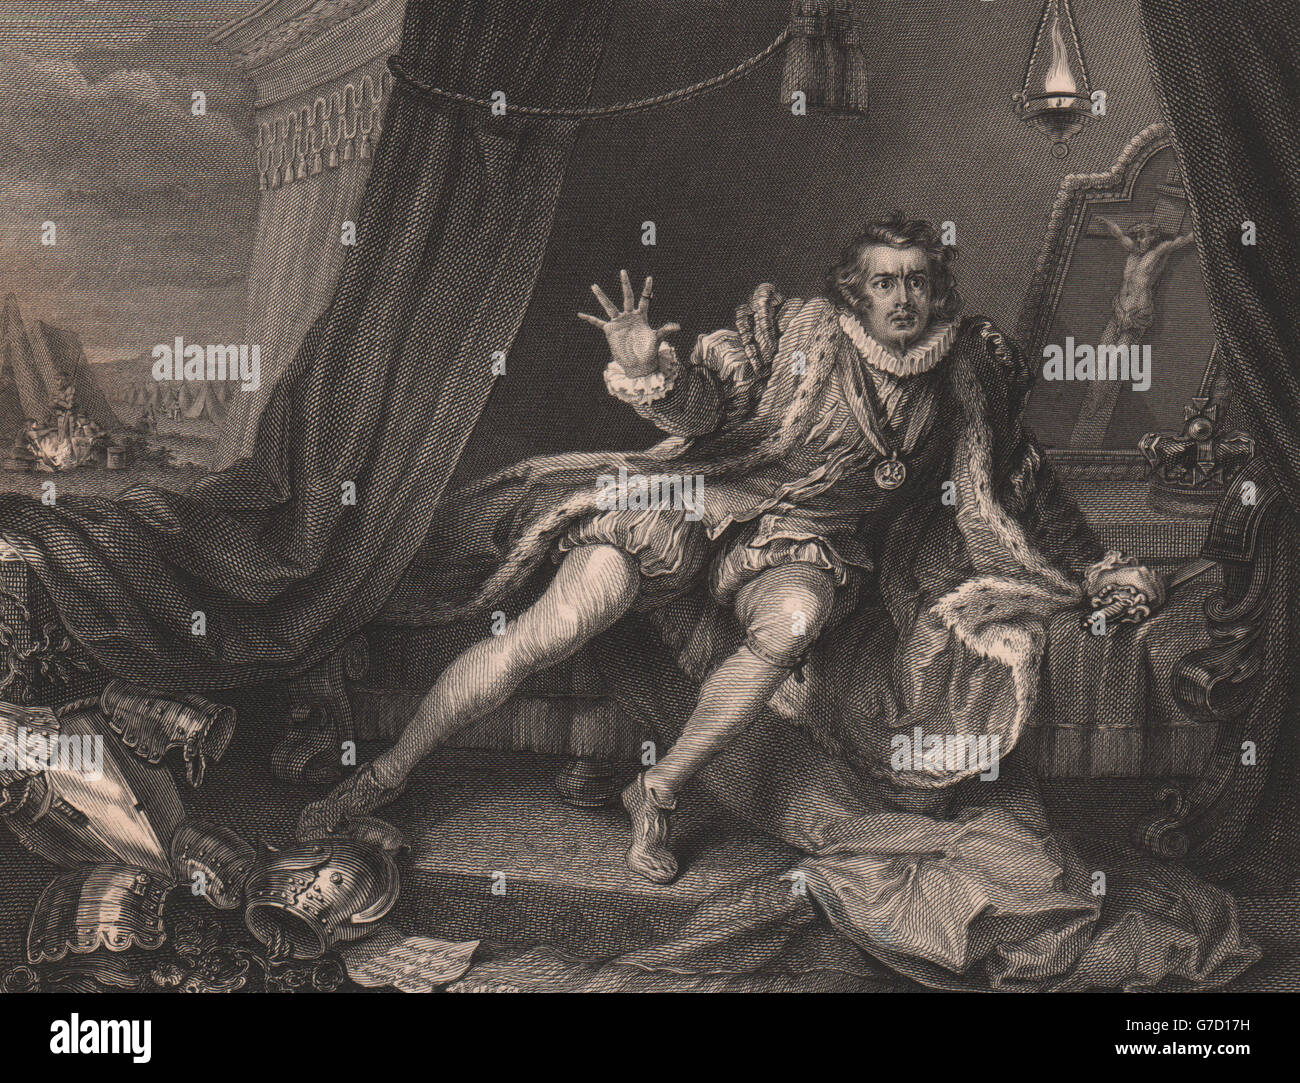 'Garrick; in the character of Richard the Third'. After William HOGARTH, 1833 Stock Photo